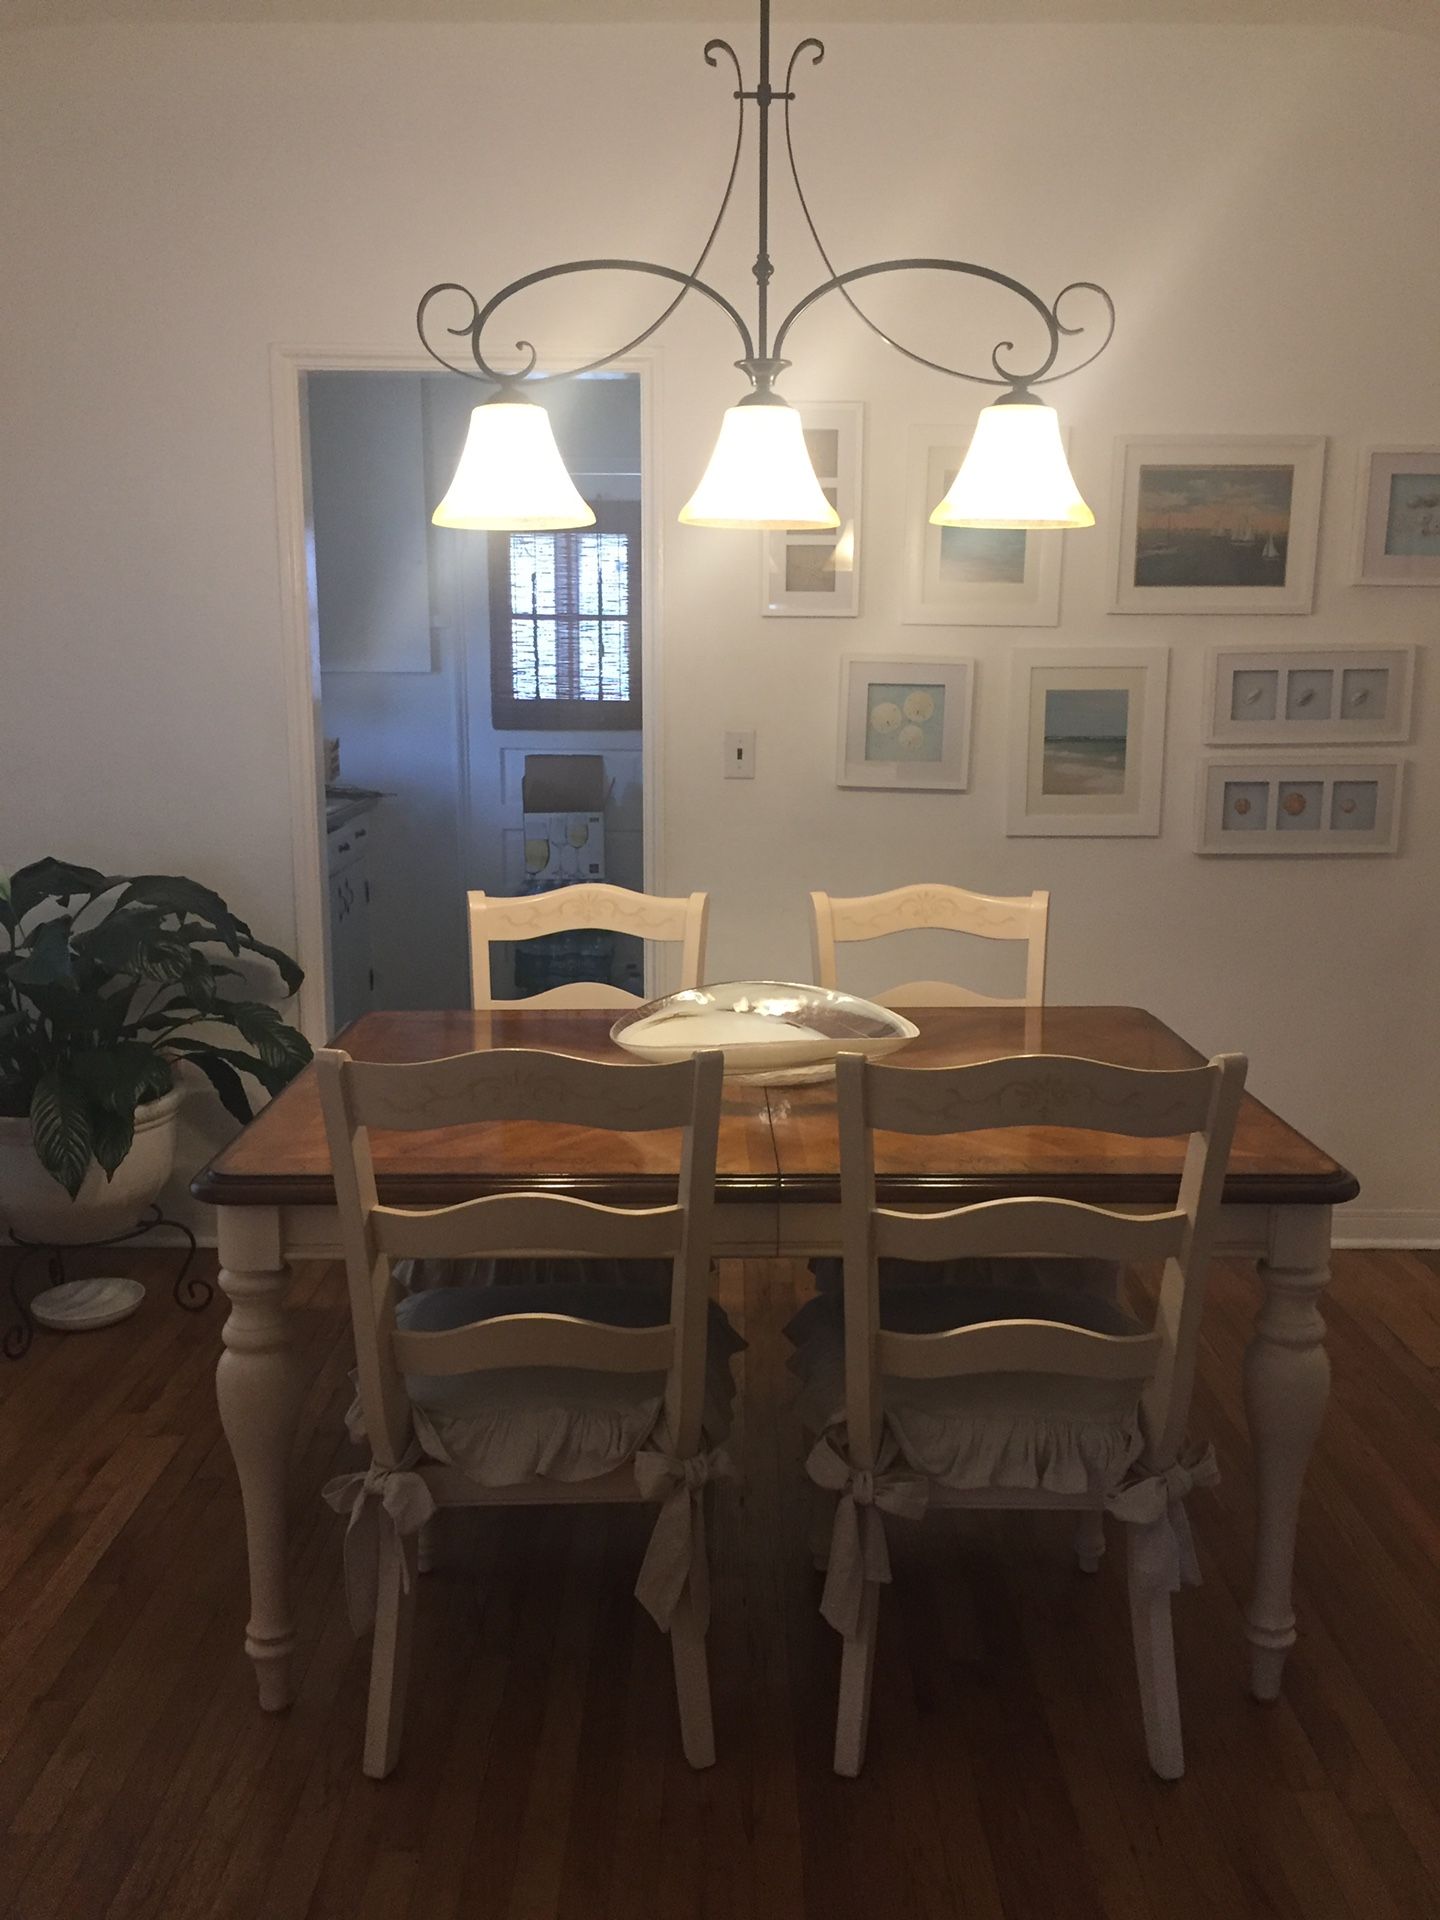 Dinner table with 4 chairs and lamp